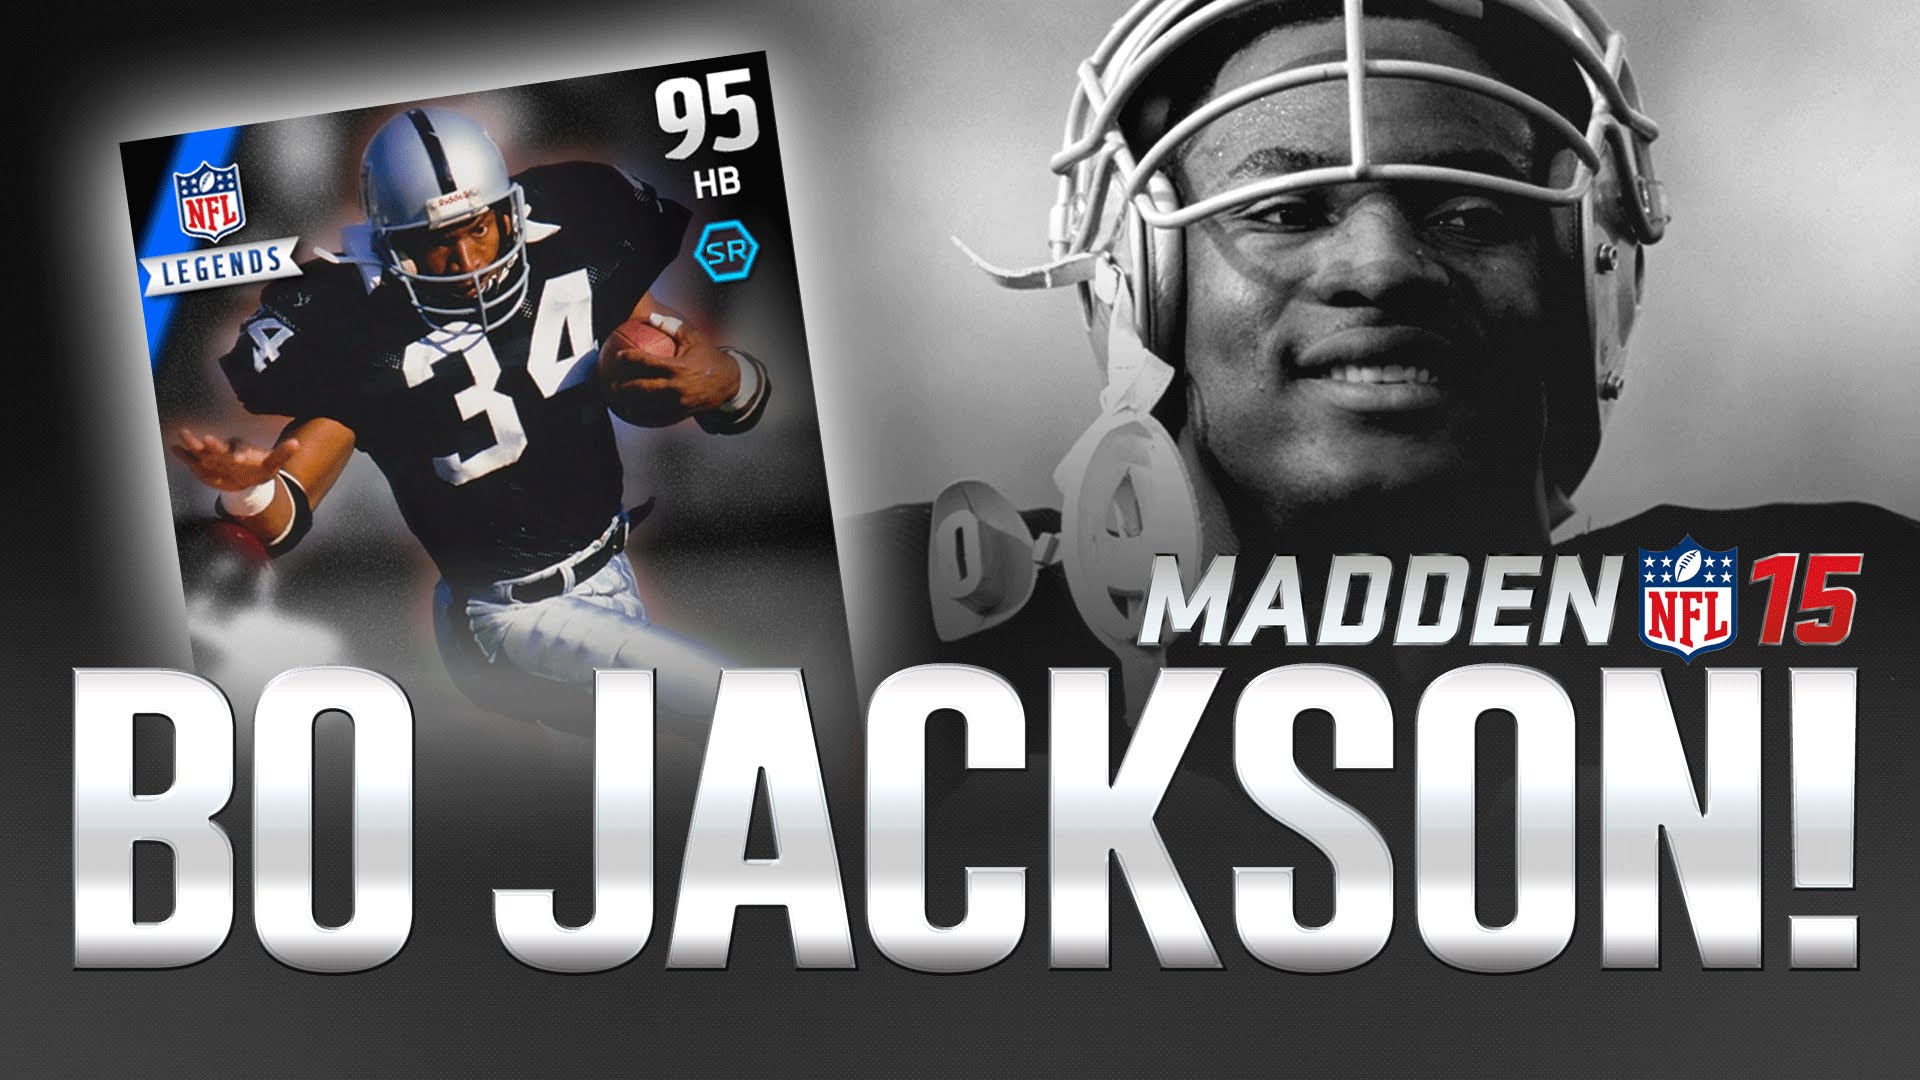 bo jackson wallpaper,super bowl,competition event,team,jersey,player